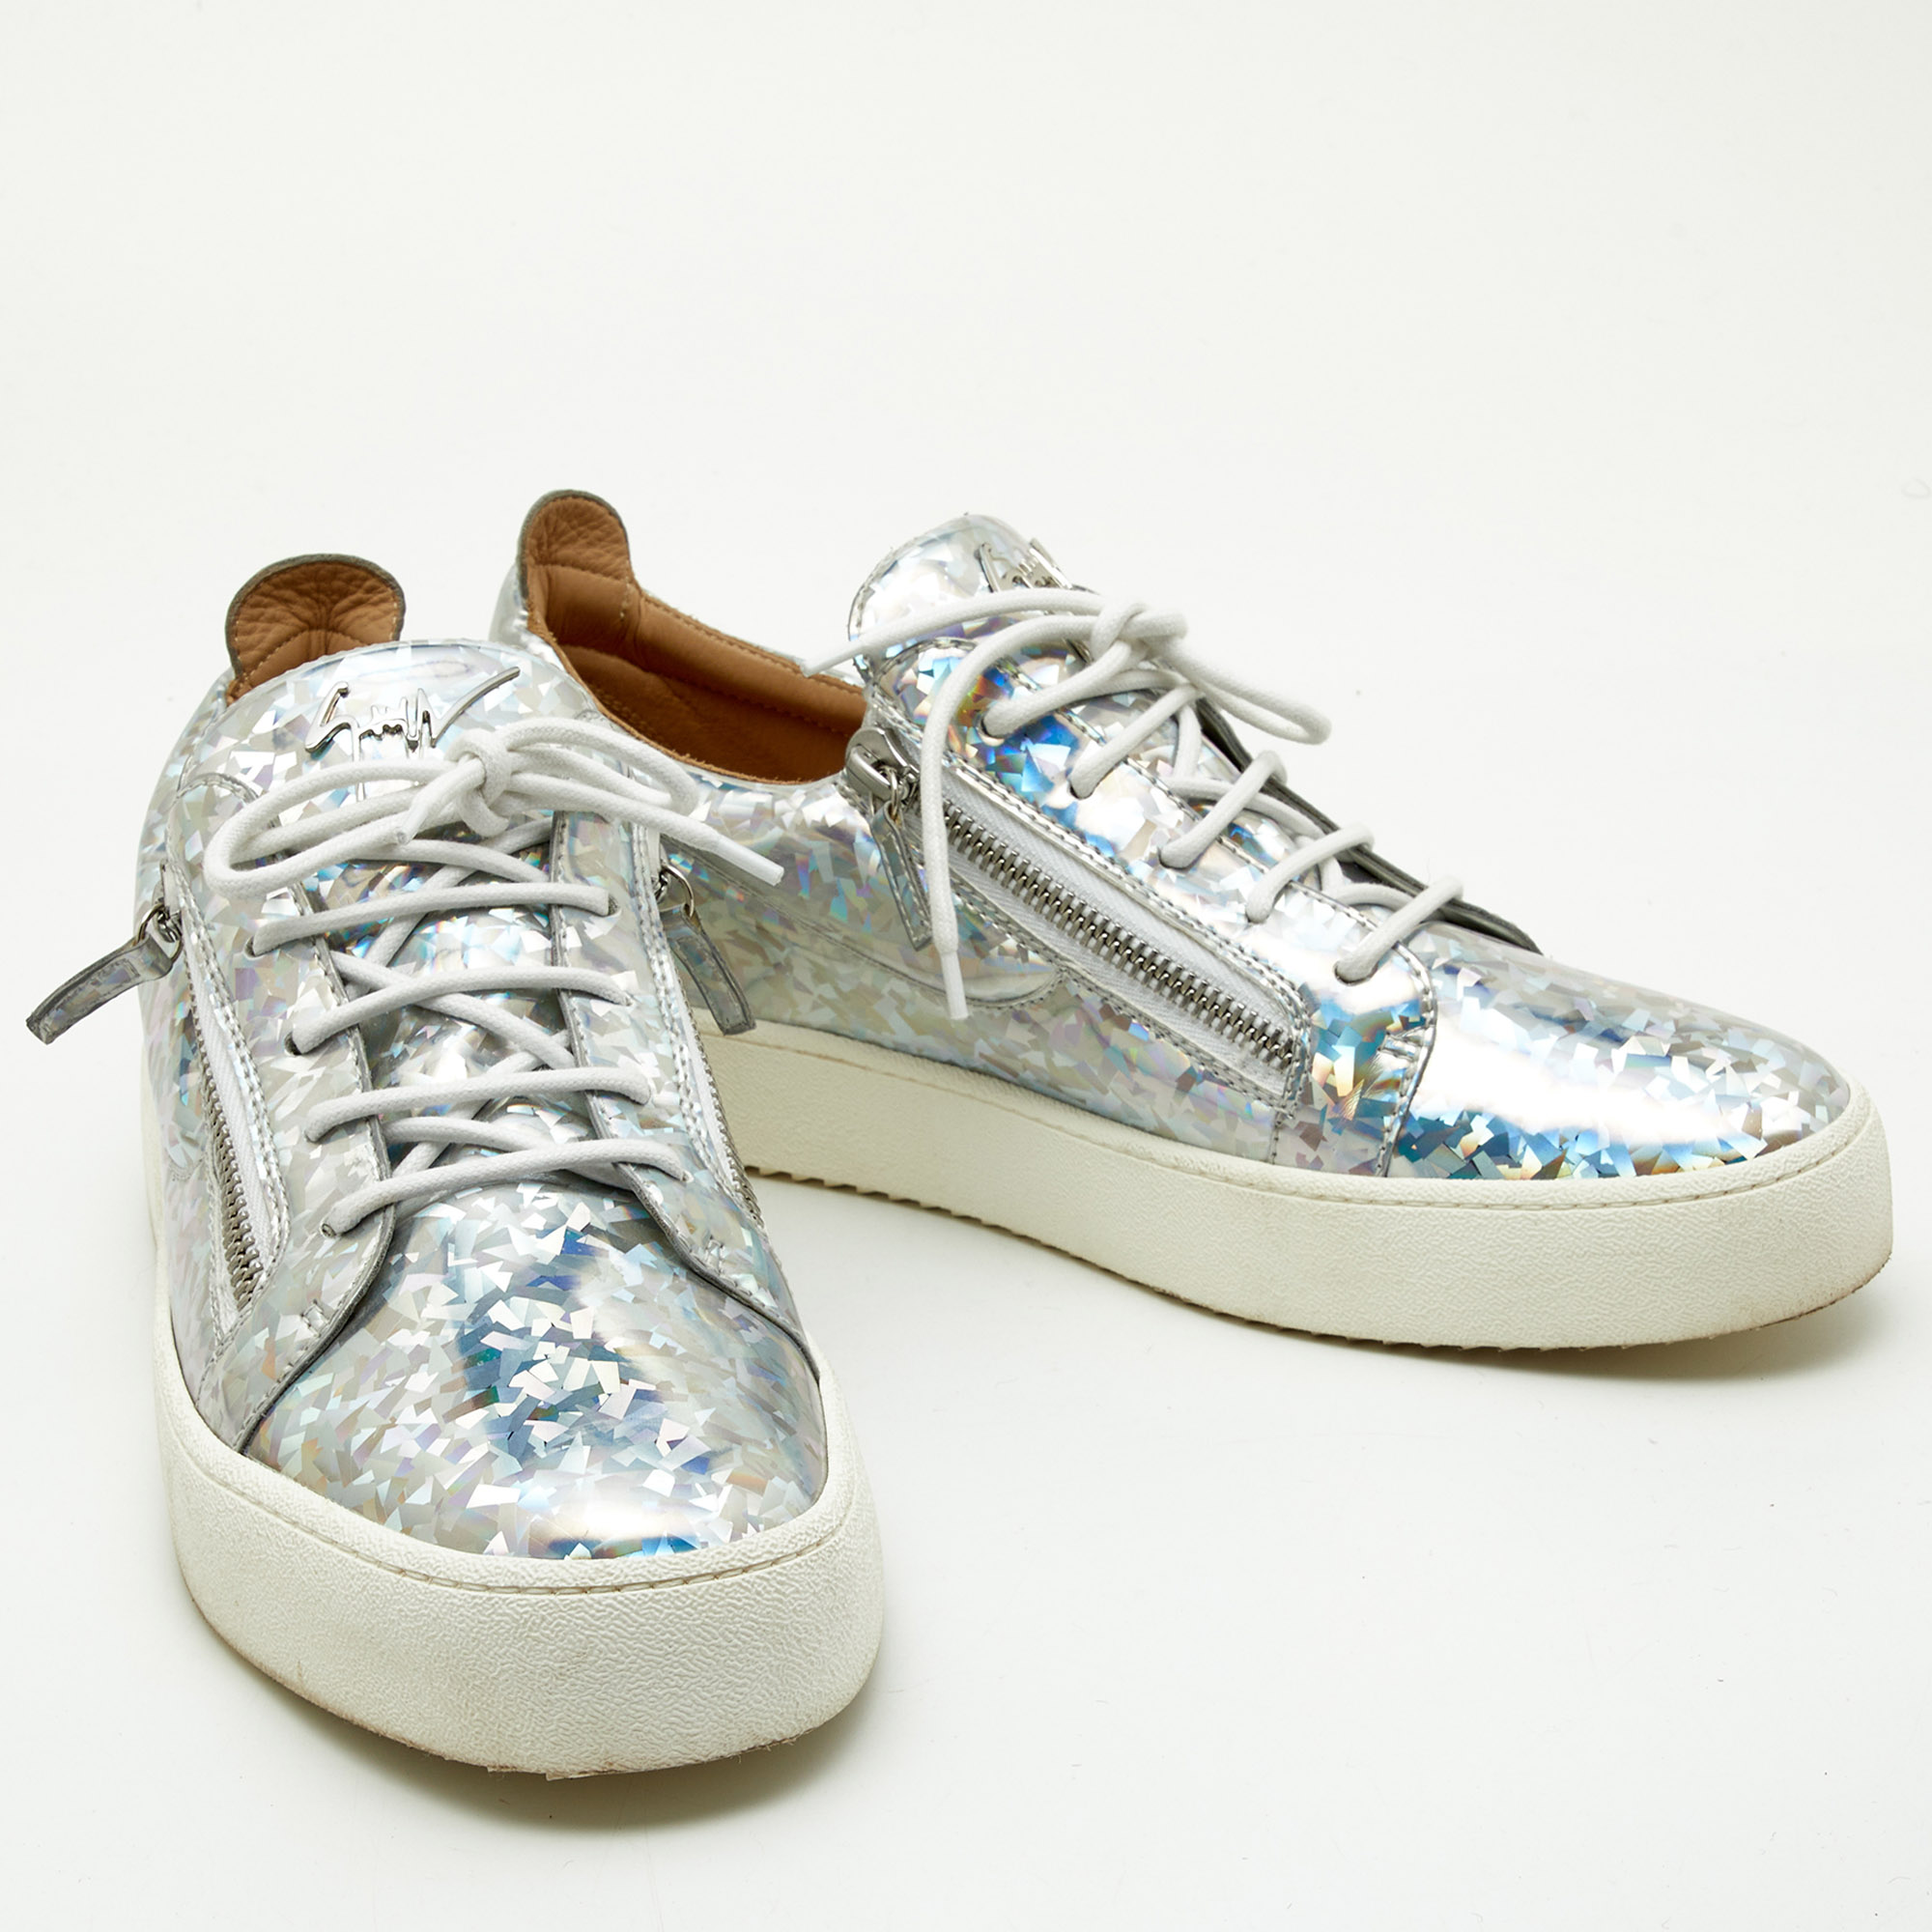 Giuseppe Zanotti Silver Holographic Leather Gail Lace Up Sneakers Size 45